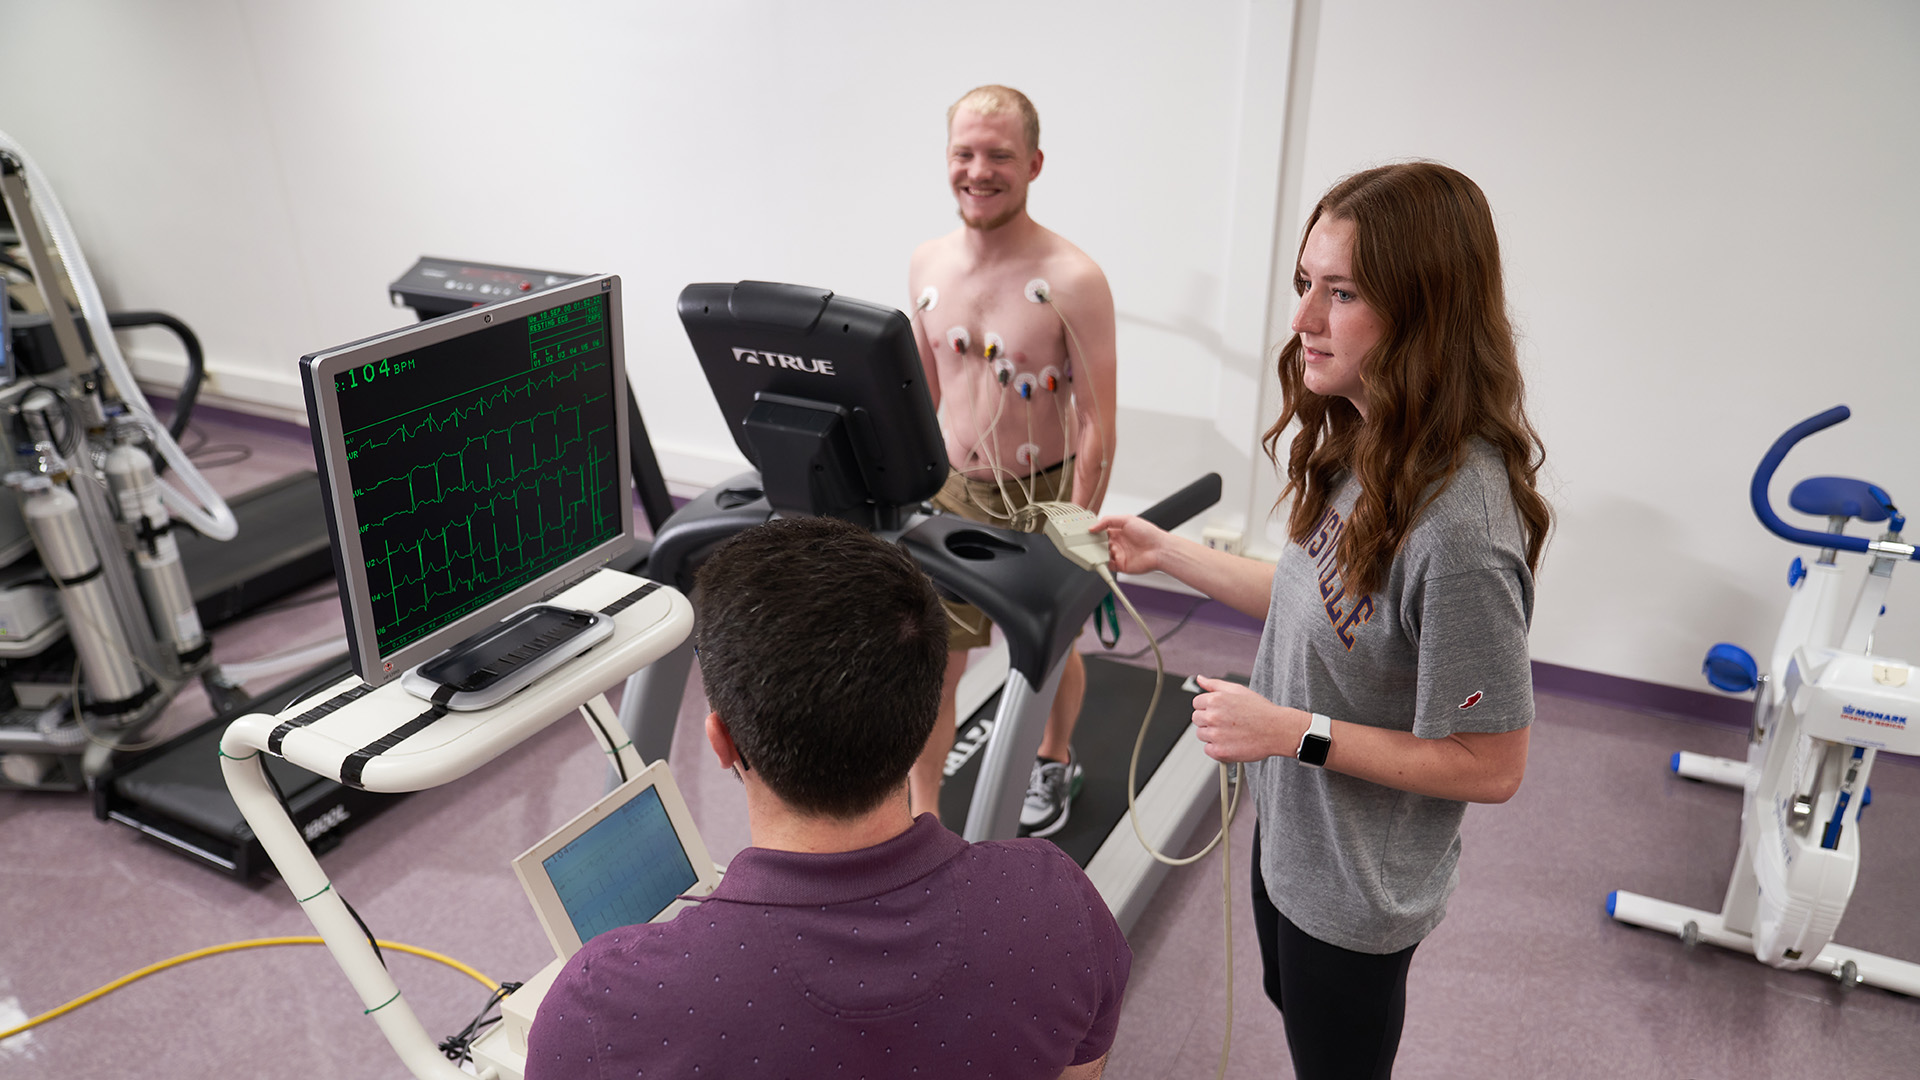 Exercise Science students and treadmill